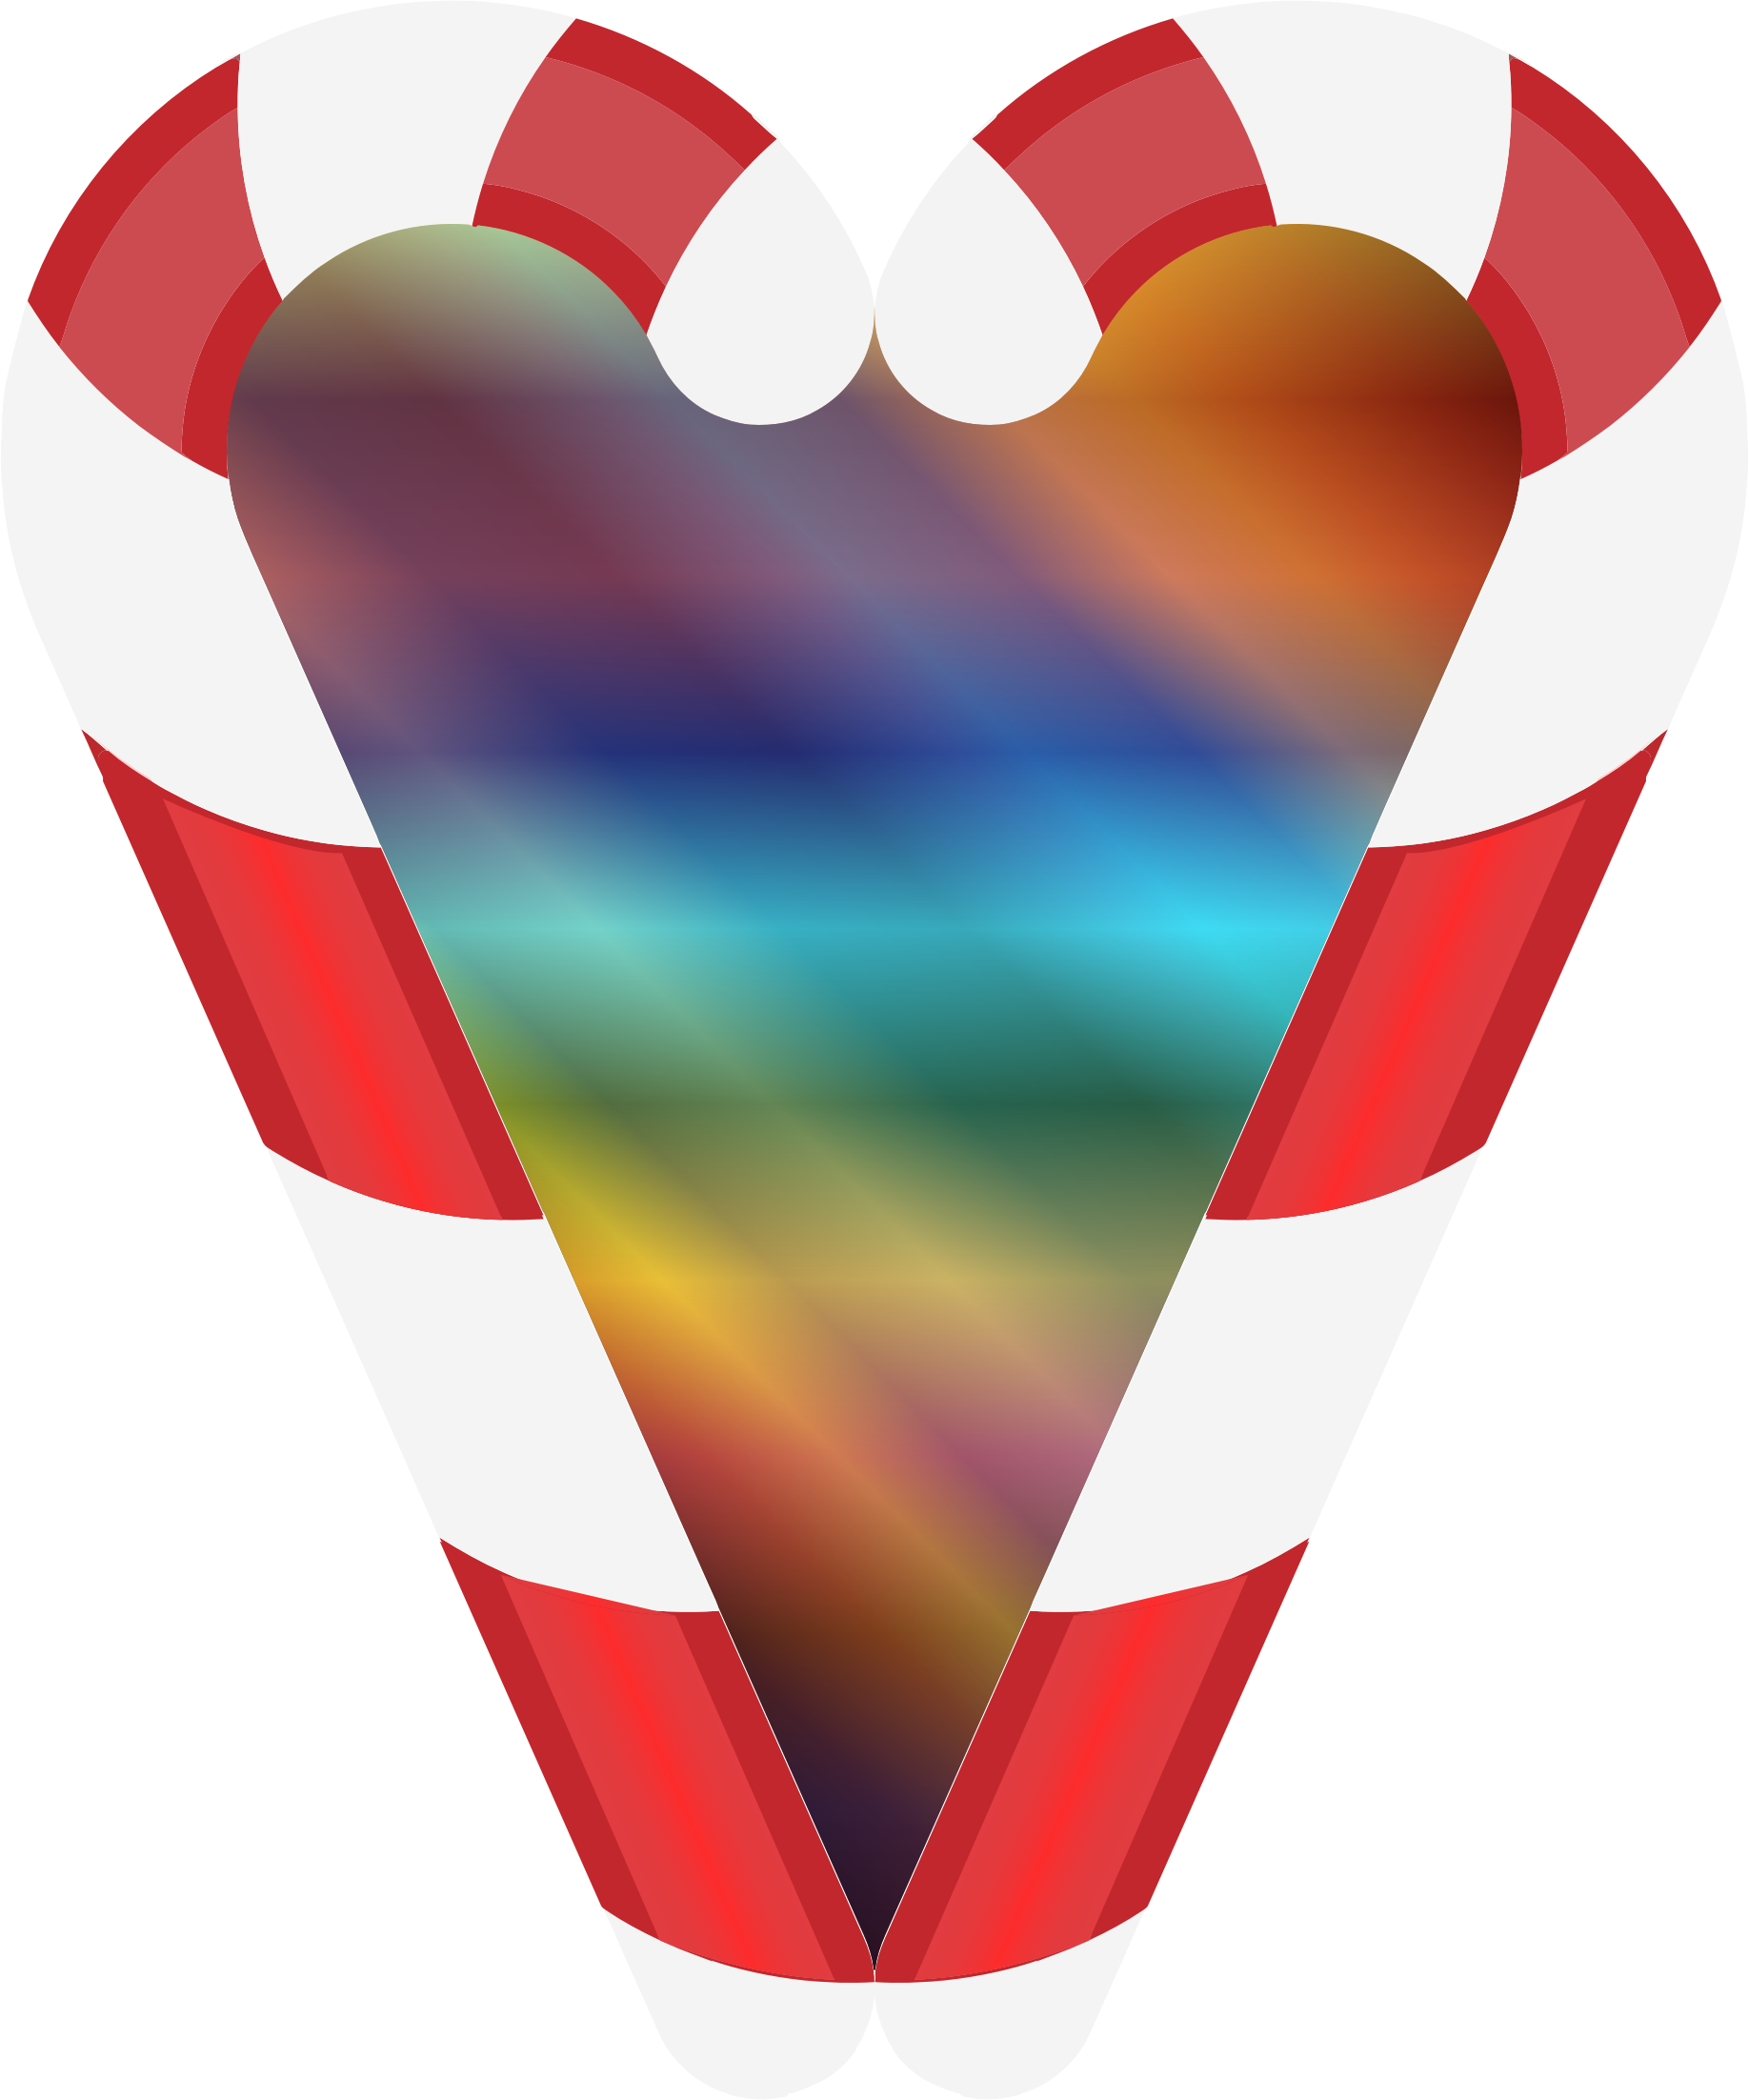 Candy Cane Ribbon Candy Heart Clip Art - Candy Cane Ribbon Candy Heart Clip Art (1836x2204)